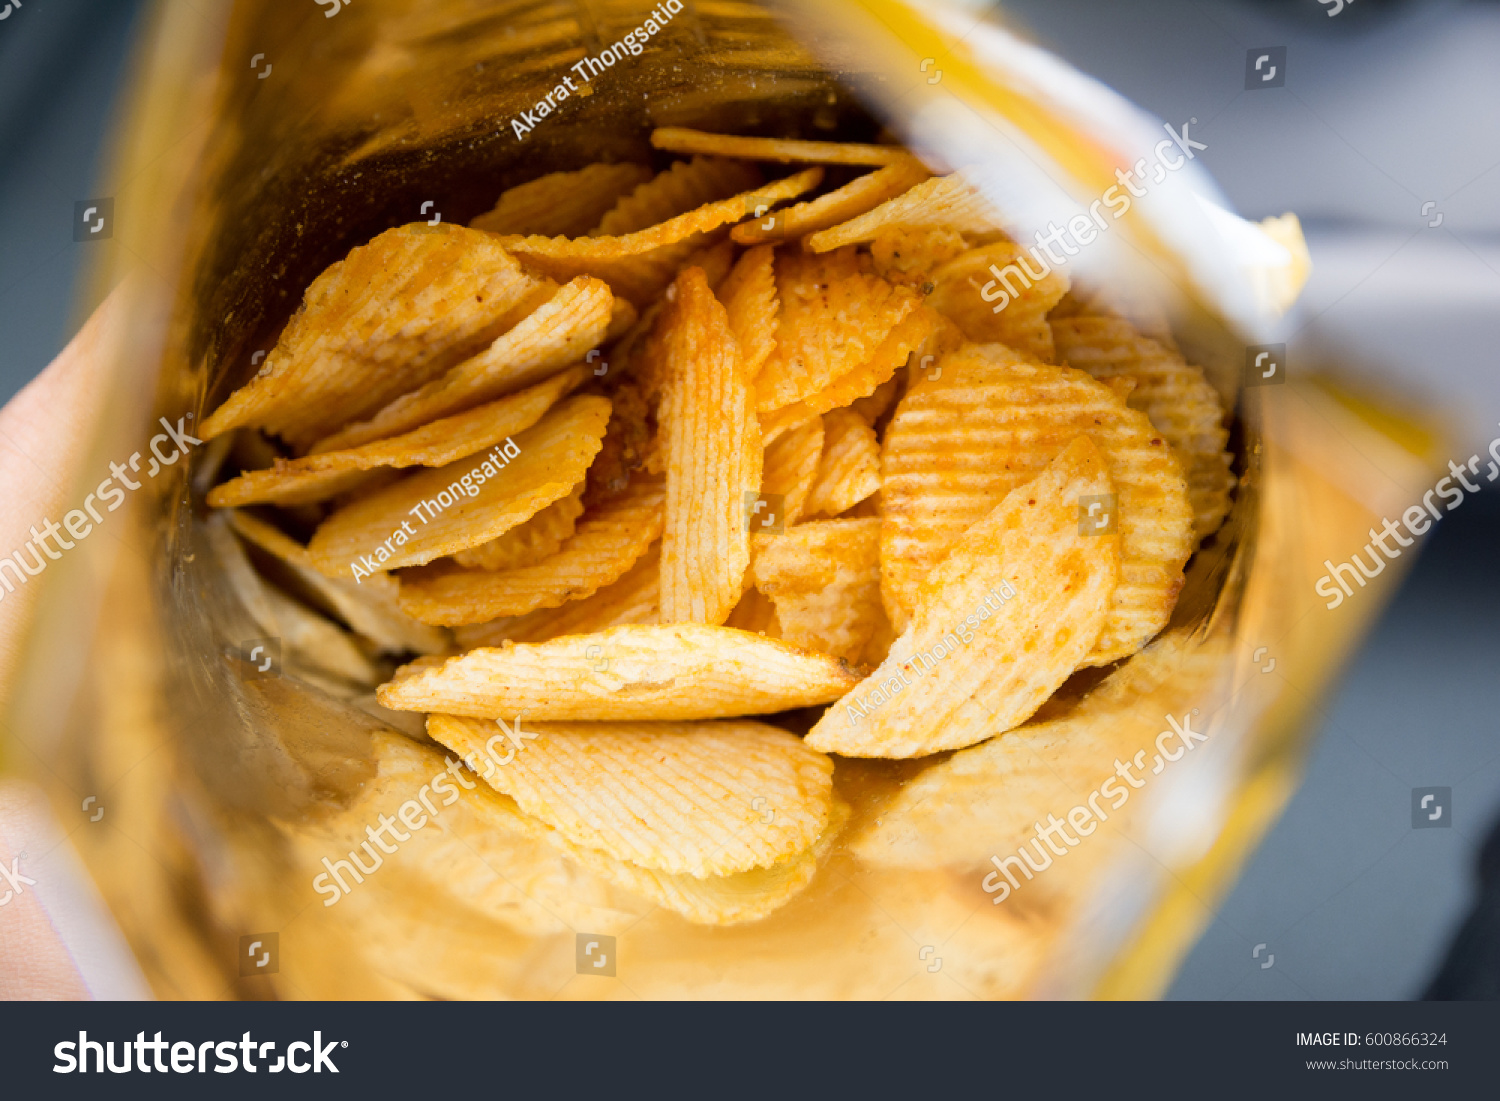 Potato chips is snack in bag ready to eat and fat food or junk food., Potato Chips in a Ready-to-Eat Bag. #600866324